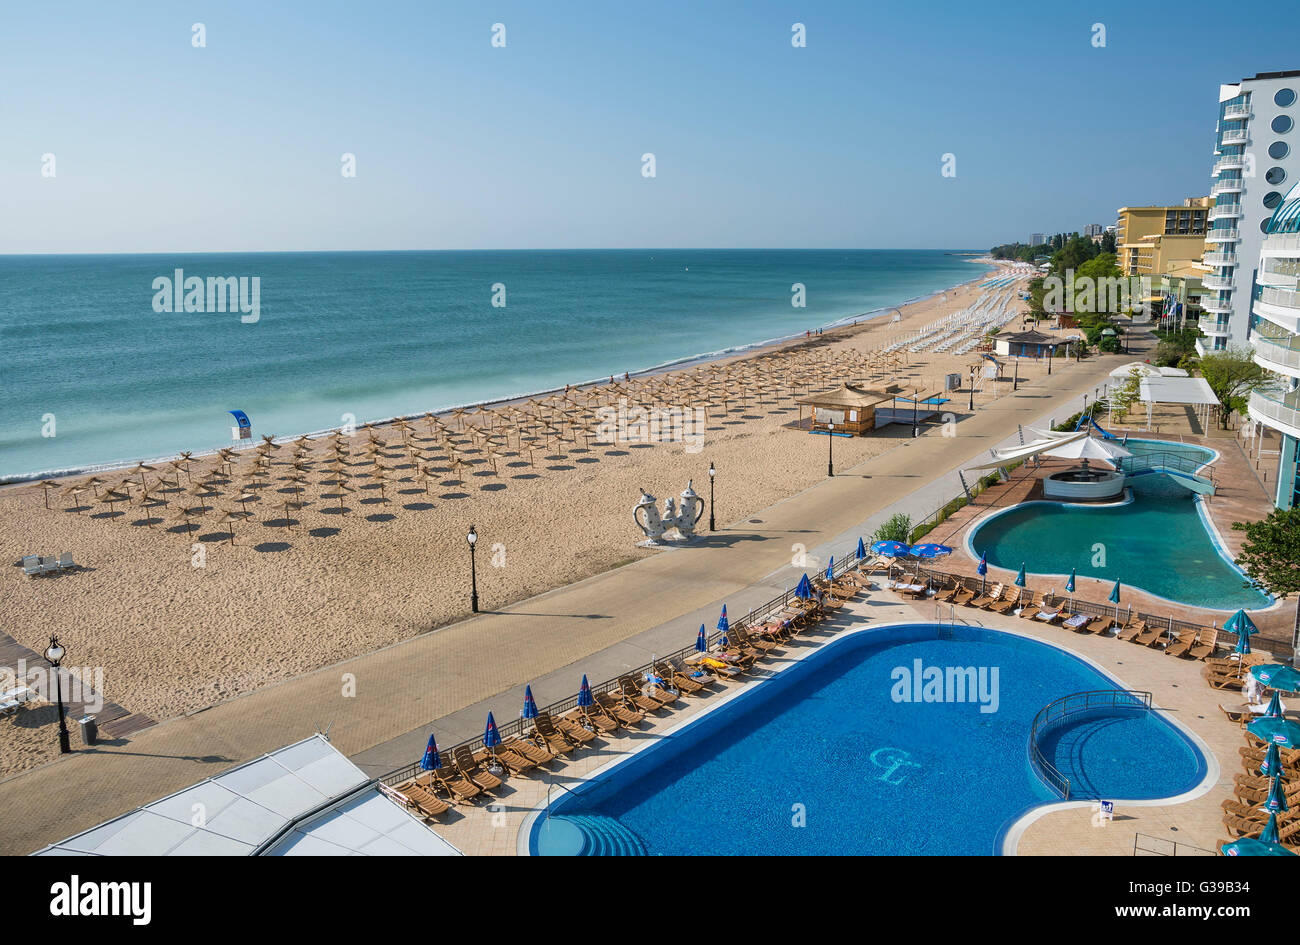 Golden Sands Beach Summer Attraction And Resort At The Black Sea In